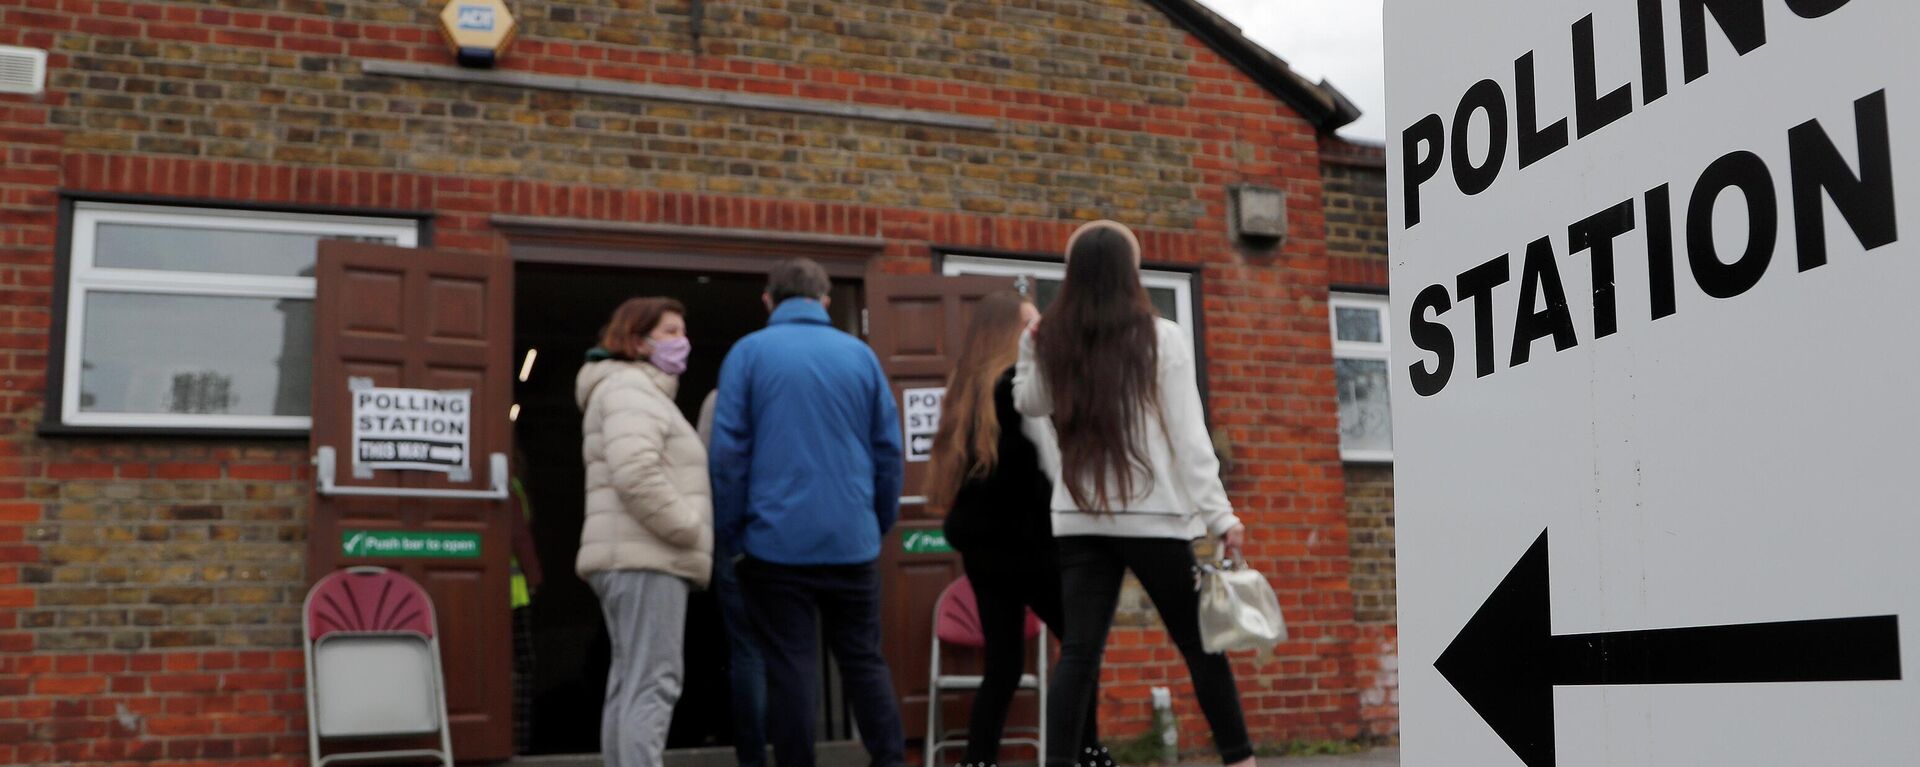 FILE - People queue at the entrance of a polling station in London, on May 6, 2021. Britain’s electoral watchdog said Friday, June 23, 2023 that about 14,000 people were prevented from voting in last month’s local elections because of a new law requiring voters to show photo identification.The Electoral Commission said 0.25% of people who went to polling stations were unable to cast ballots because they didn’t have the right ID, and “significantly more” than that likely did not show up at all. - Sputnik International, 1920, 21.07.2023